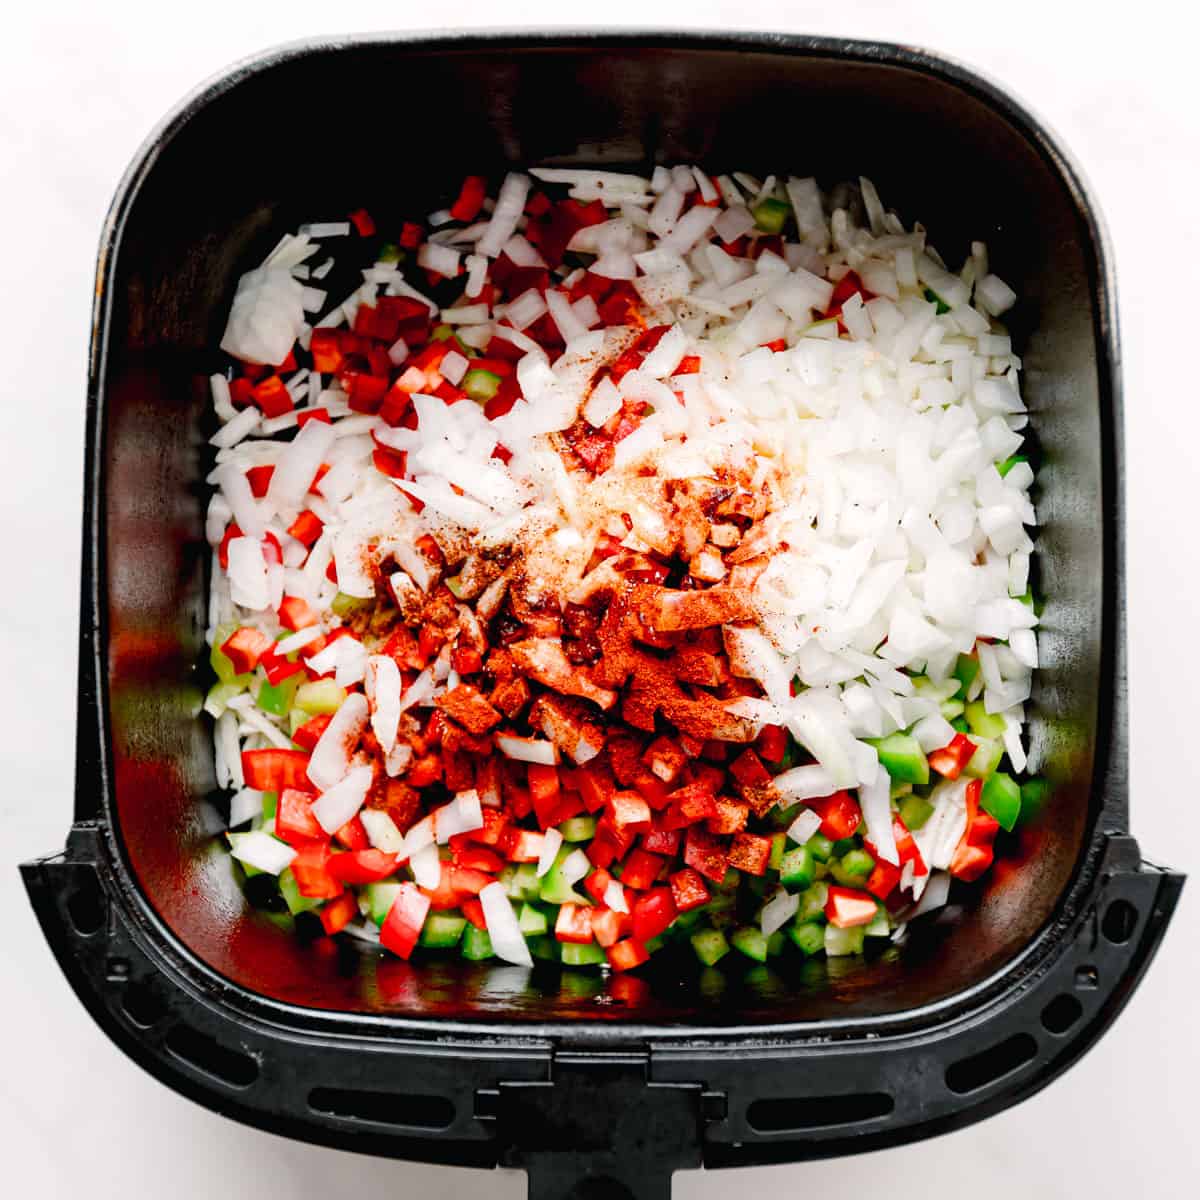 Place the frozen shredded hashbrowns, diced bell peppers, onion, paprika, garlic powder, salt, and black pepper in the air fryer basket.